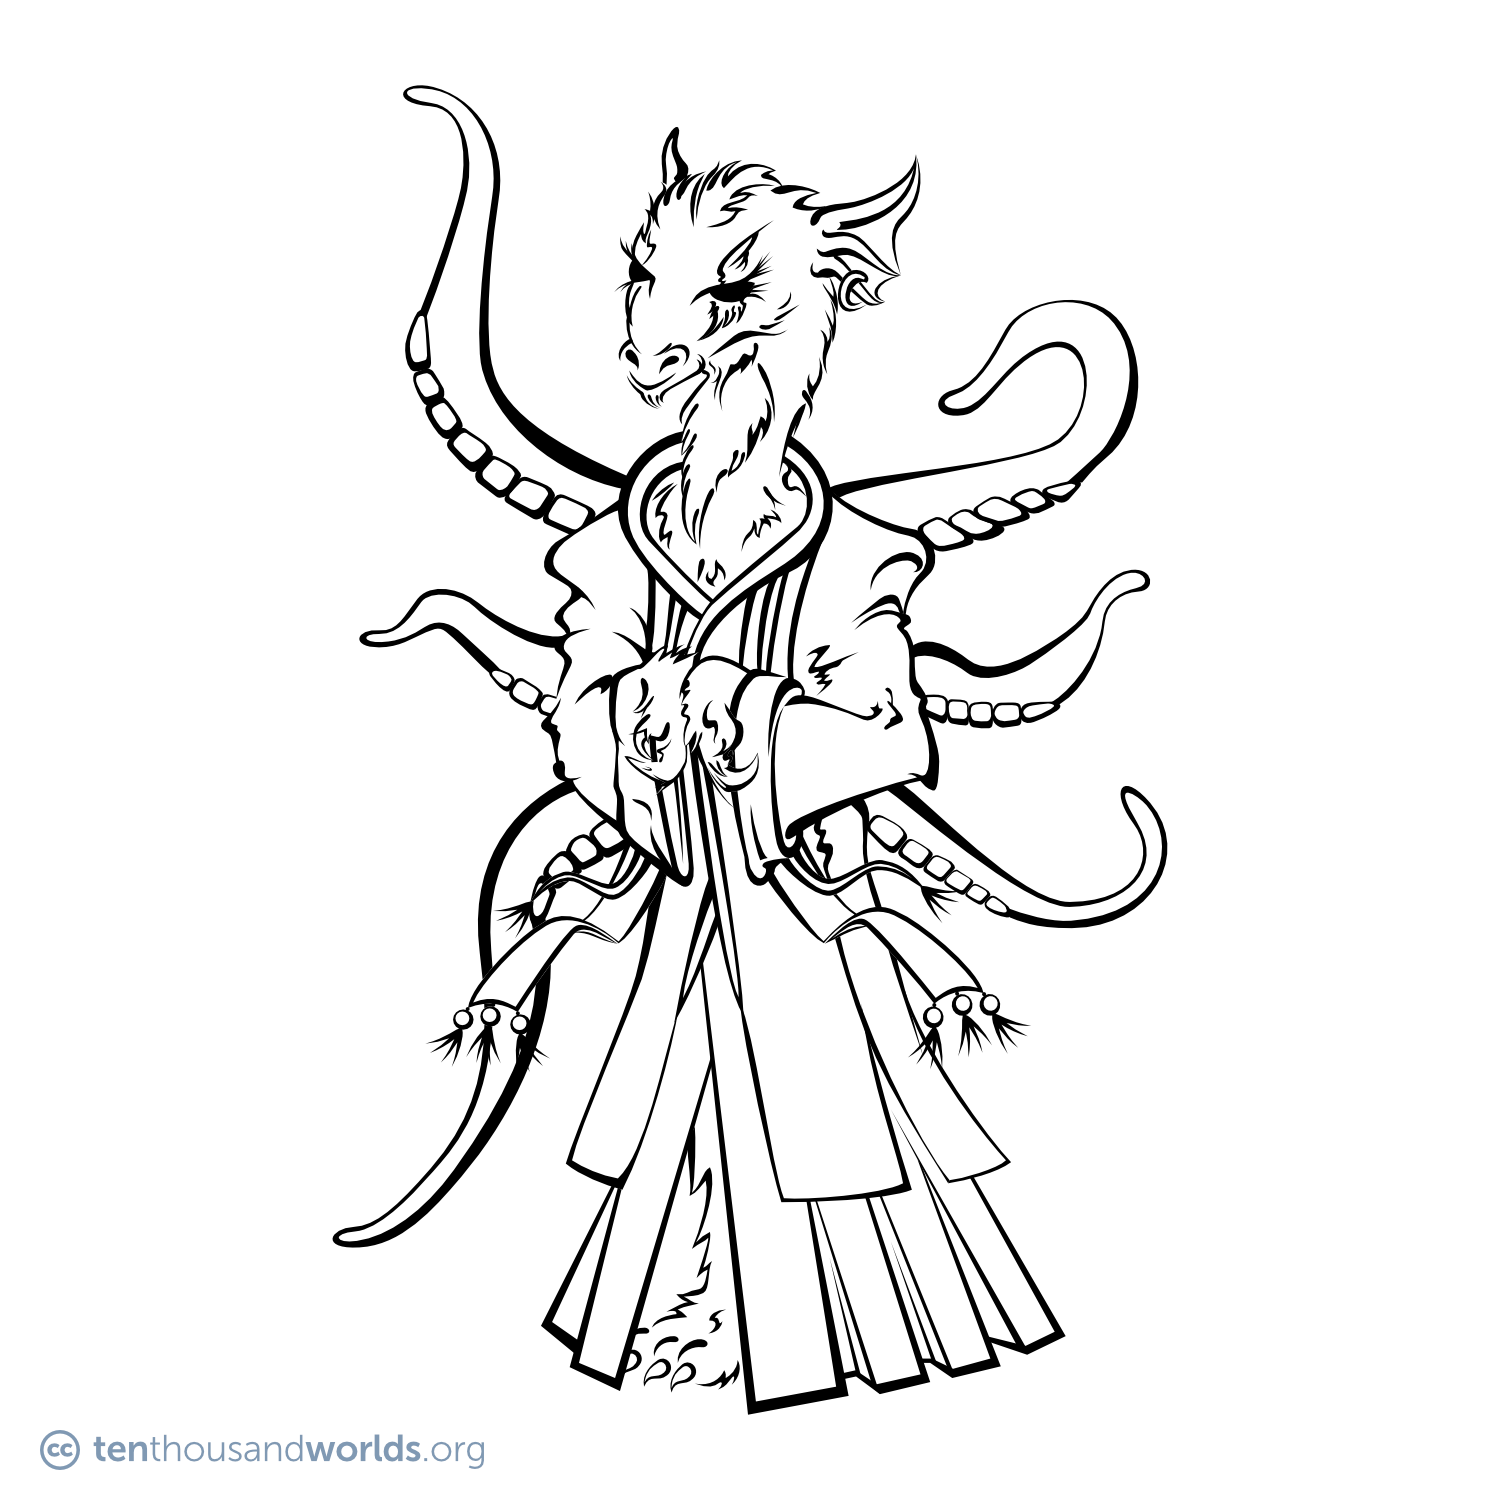 An ink outline of an upright, fuzzy being in robes and tasseled scarves, with an antelope-like head and neck, long lashes, large frilled reptilian ears, backward-curving fore-paws, and six tentacles coming out of its back.